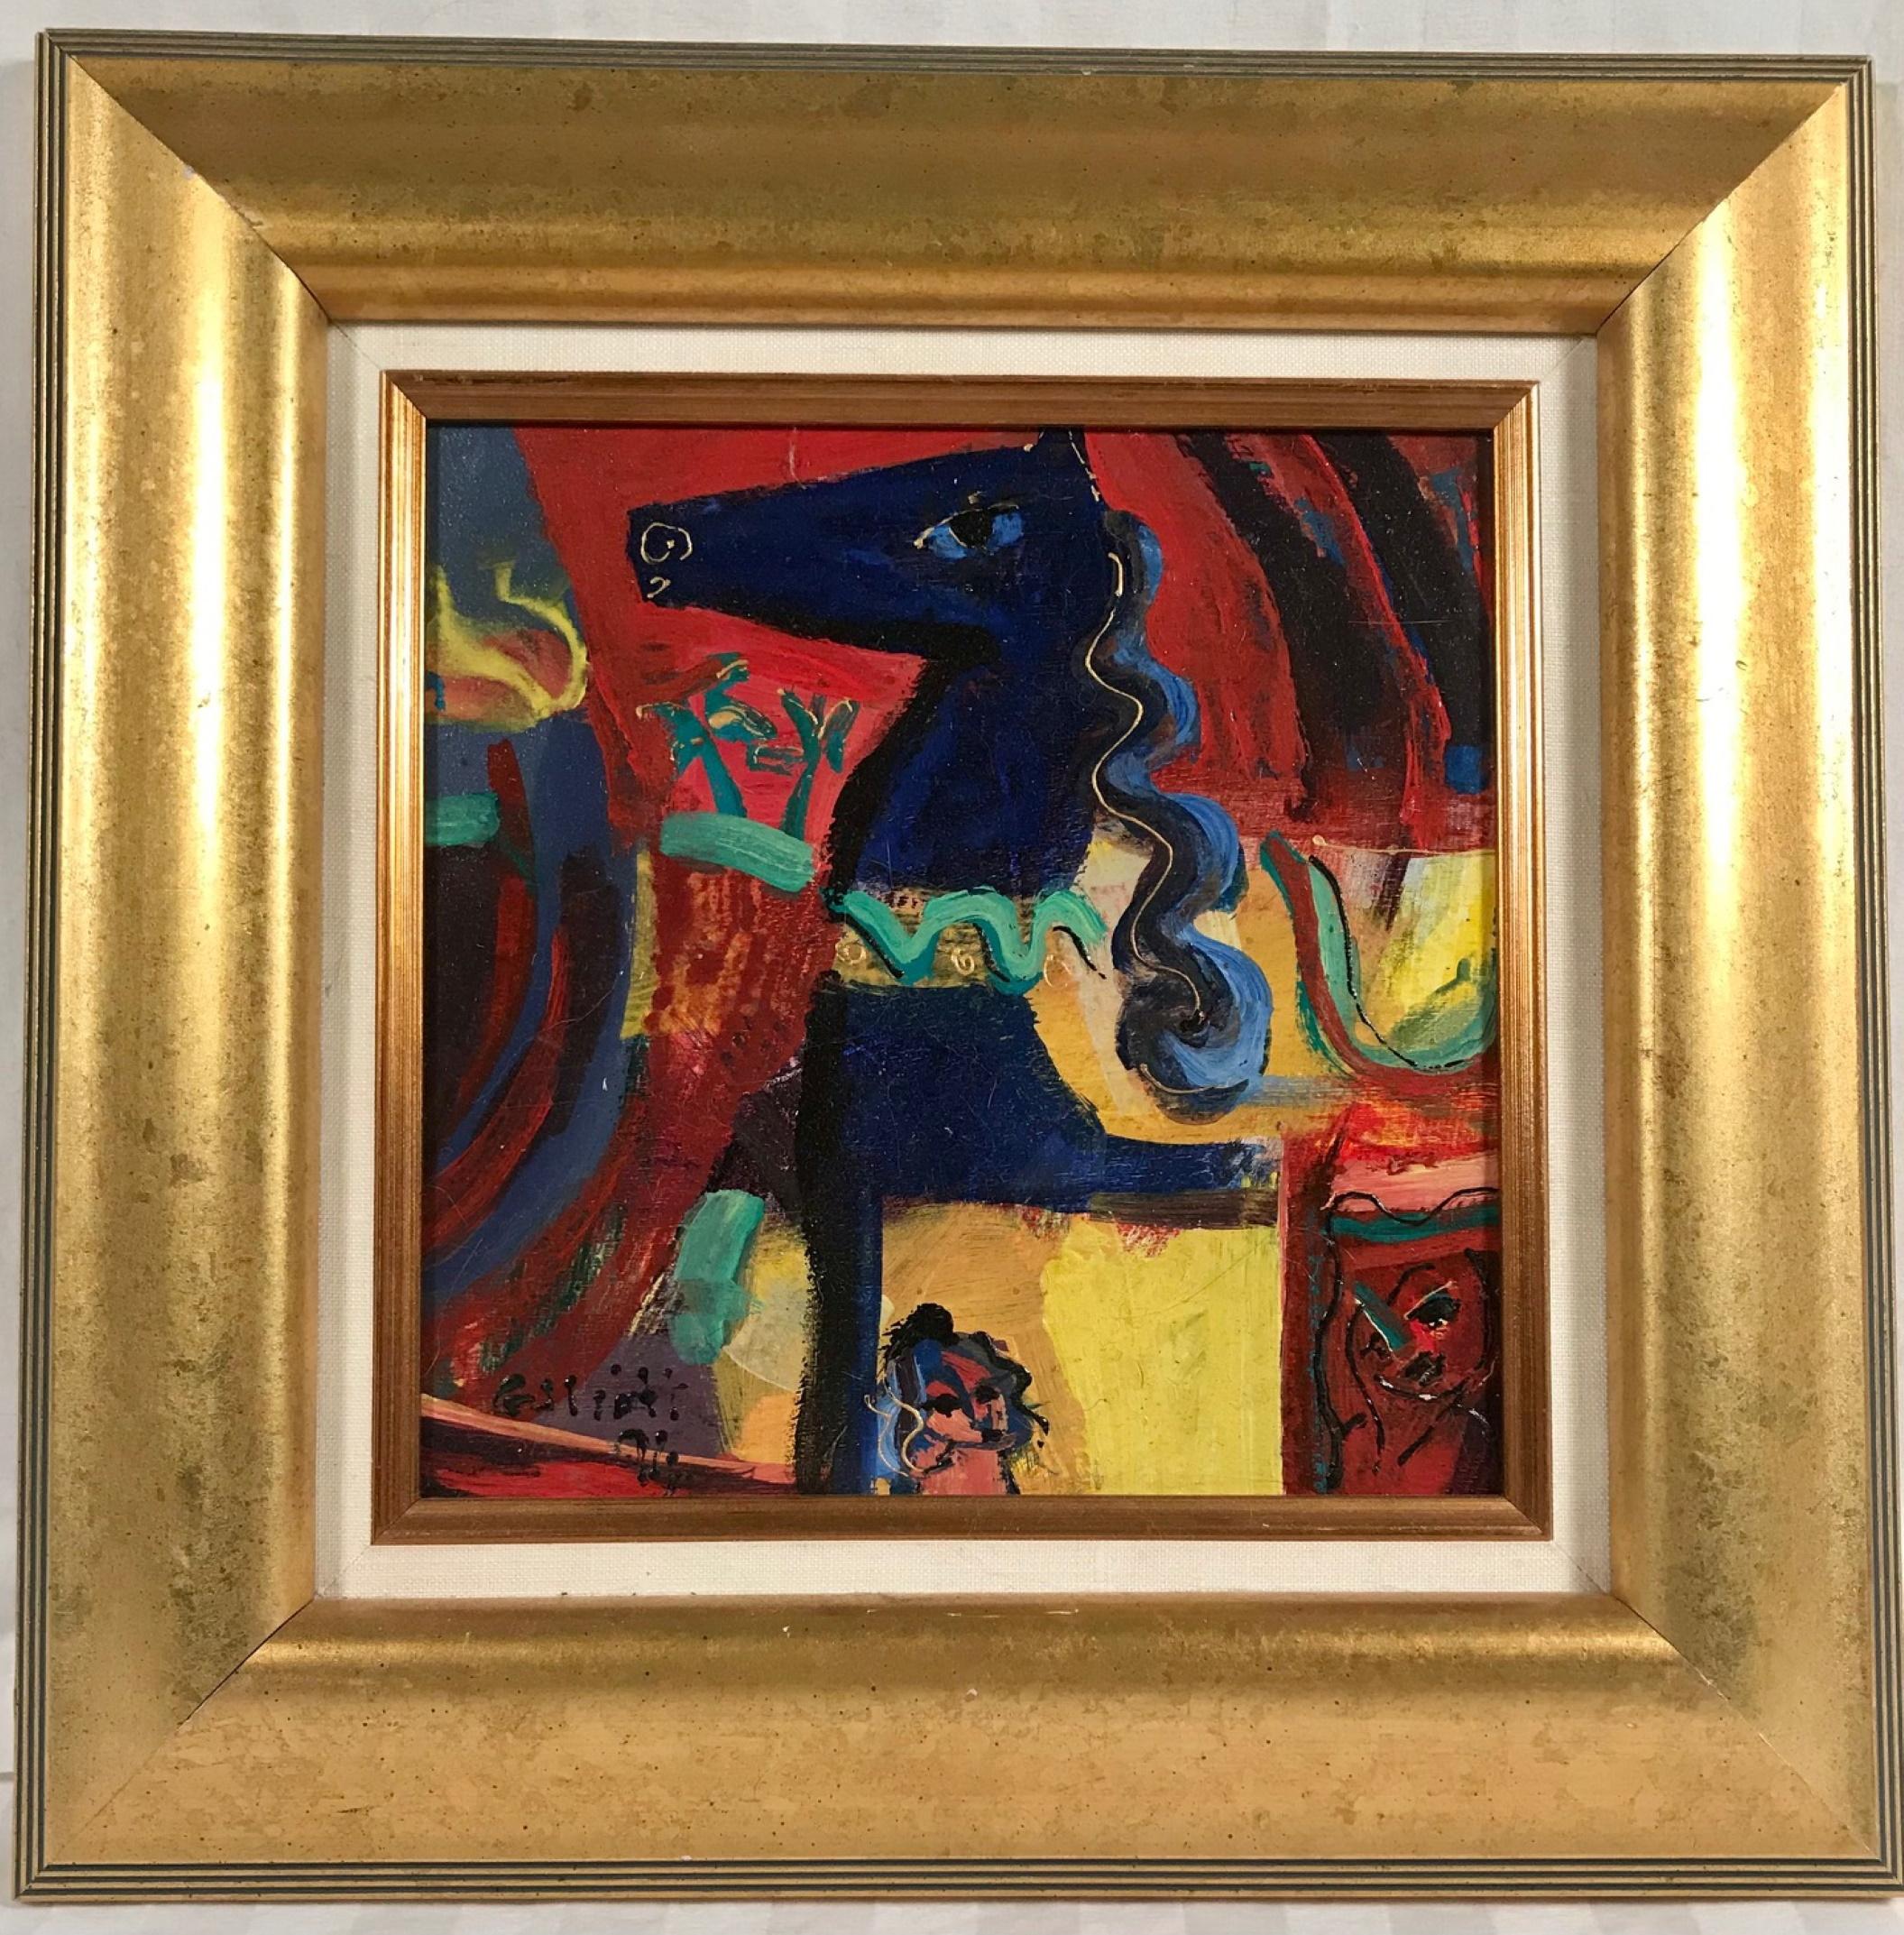 Vintage pair of paintings, original Mid-Century Modern expressionist surrealist oil on wood panel, signed

These expressionist paintings are executed in oil on wood panel. Both bright and rich color palettes are used to create many textured shapes